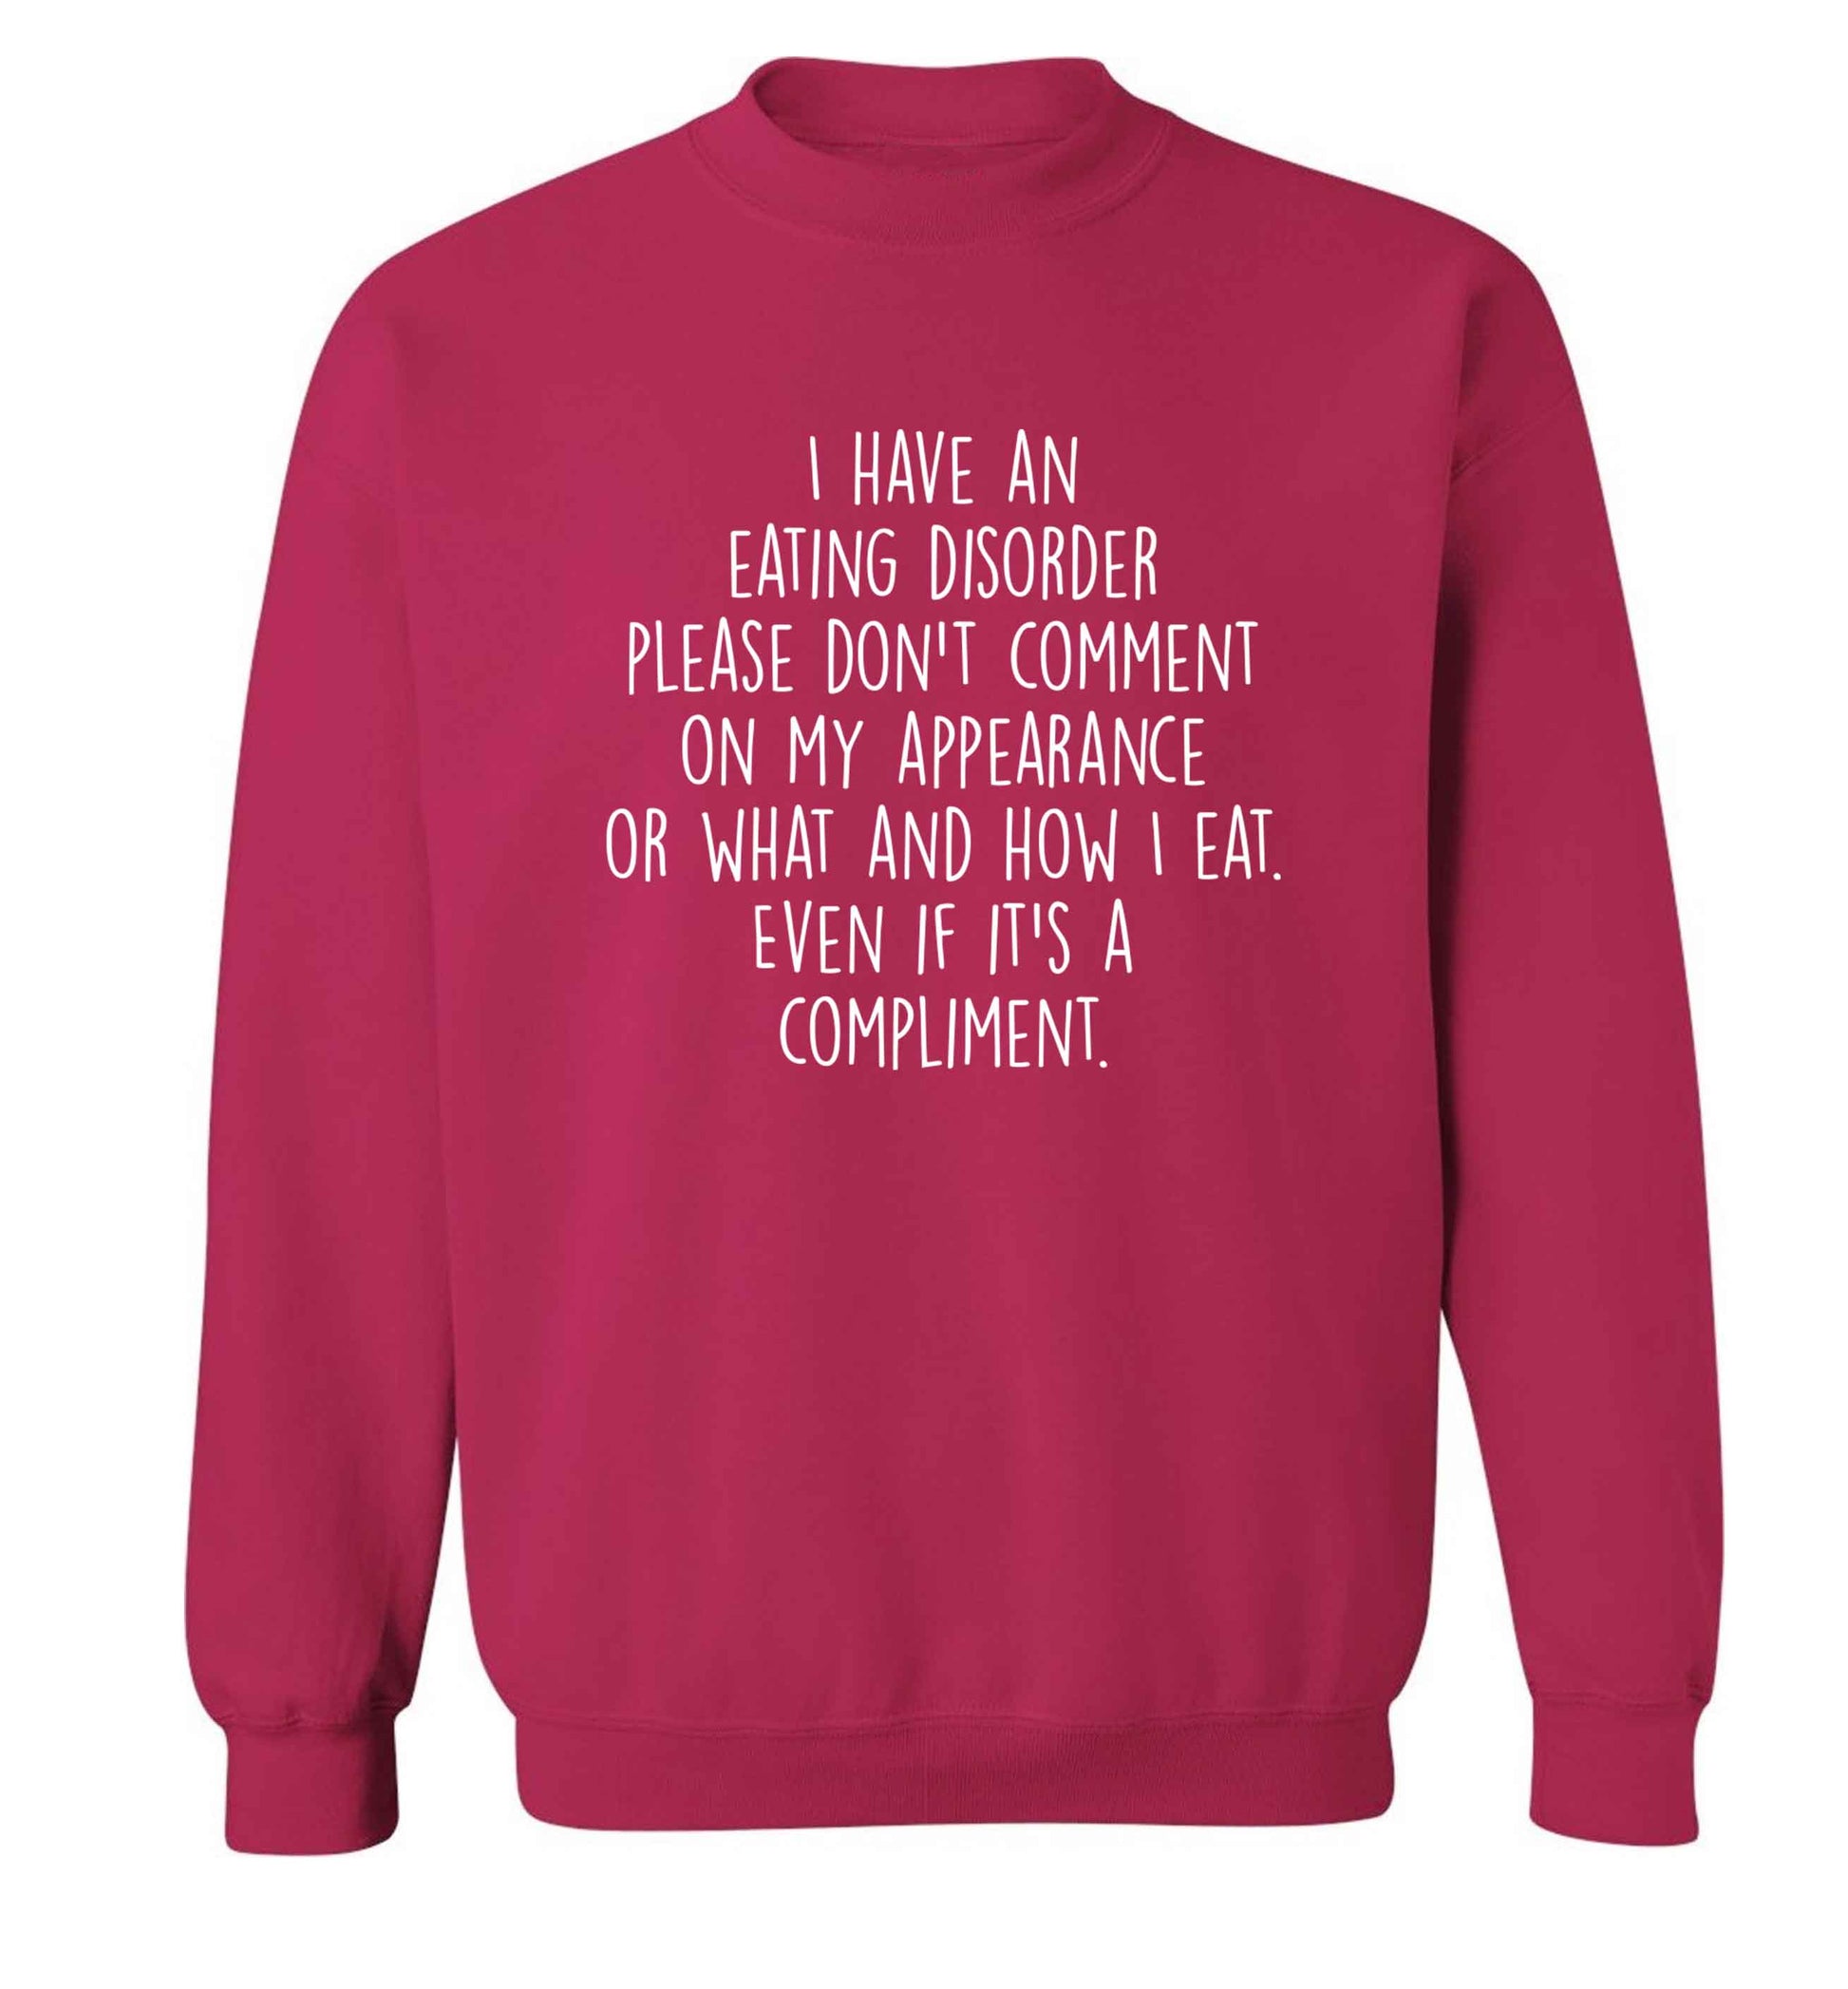 I have an eating disorder please don't comment on my appearance or what and how I eat. Even if it's a compliment adult's unisex pink sweater 2XL